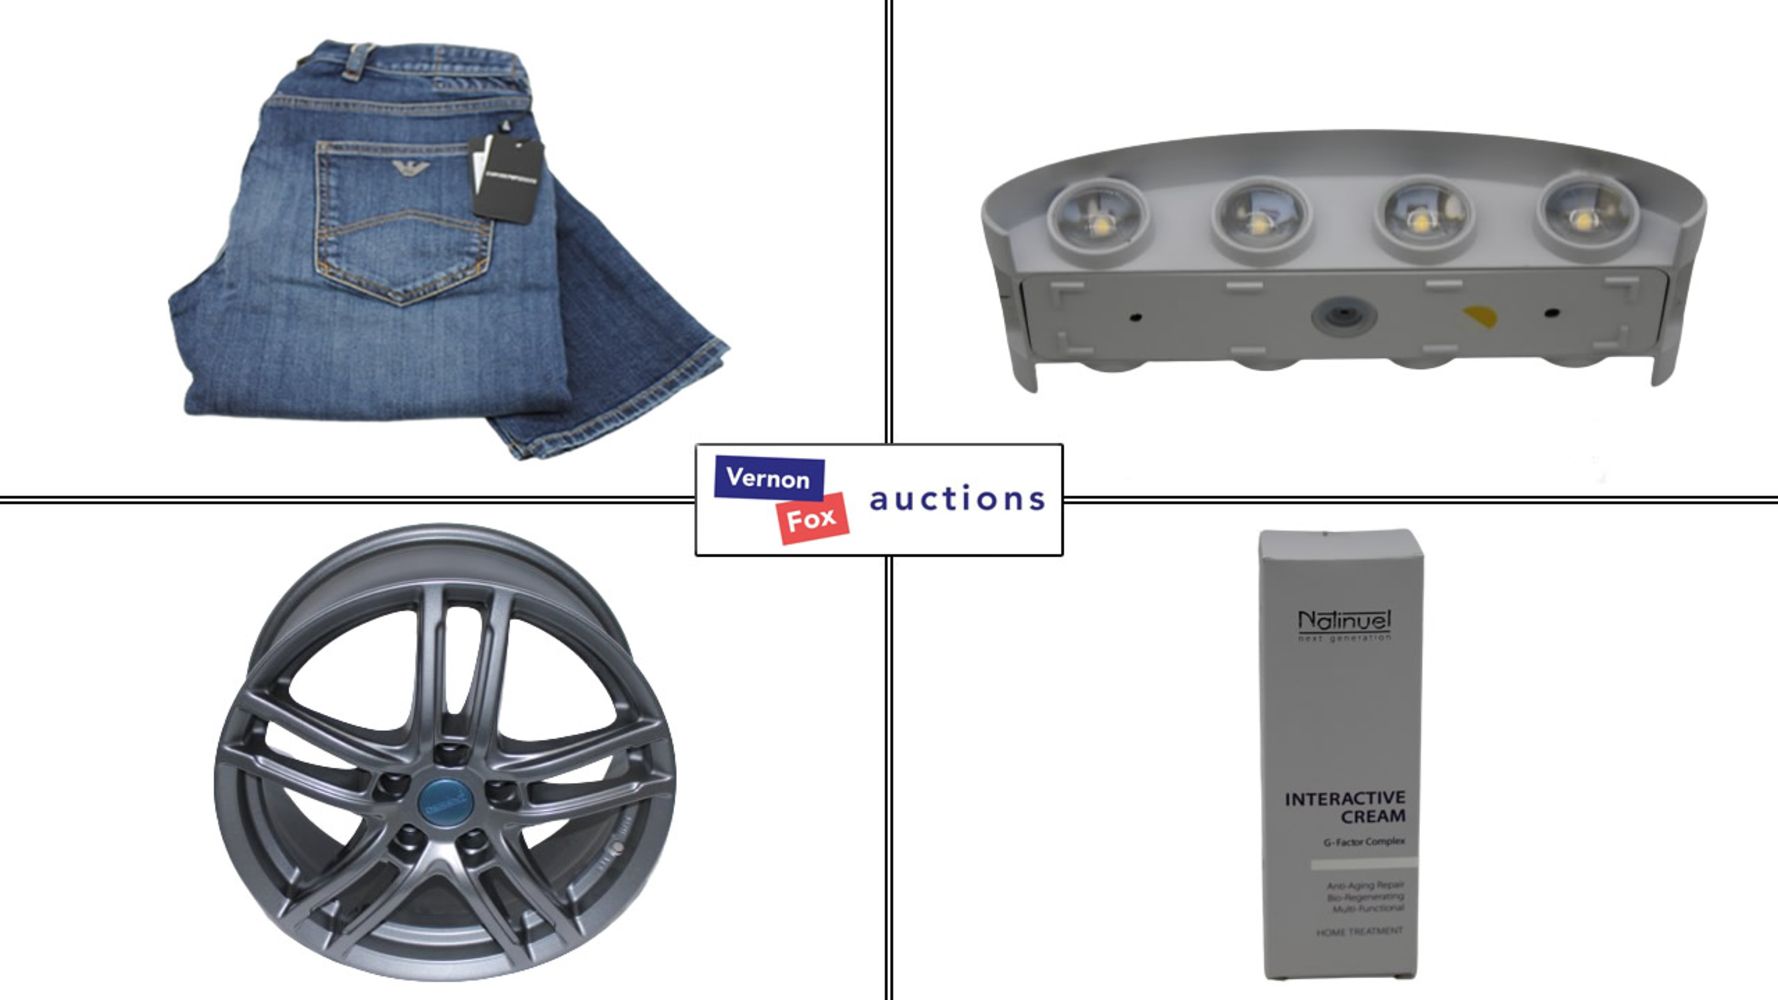 FREE UK DELIVERY: Discounted Clothing and Cosmetics, Industrial Equipment, Car Parts, Tools and more